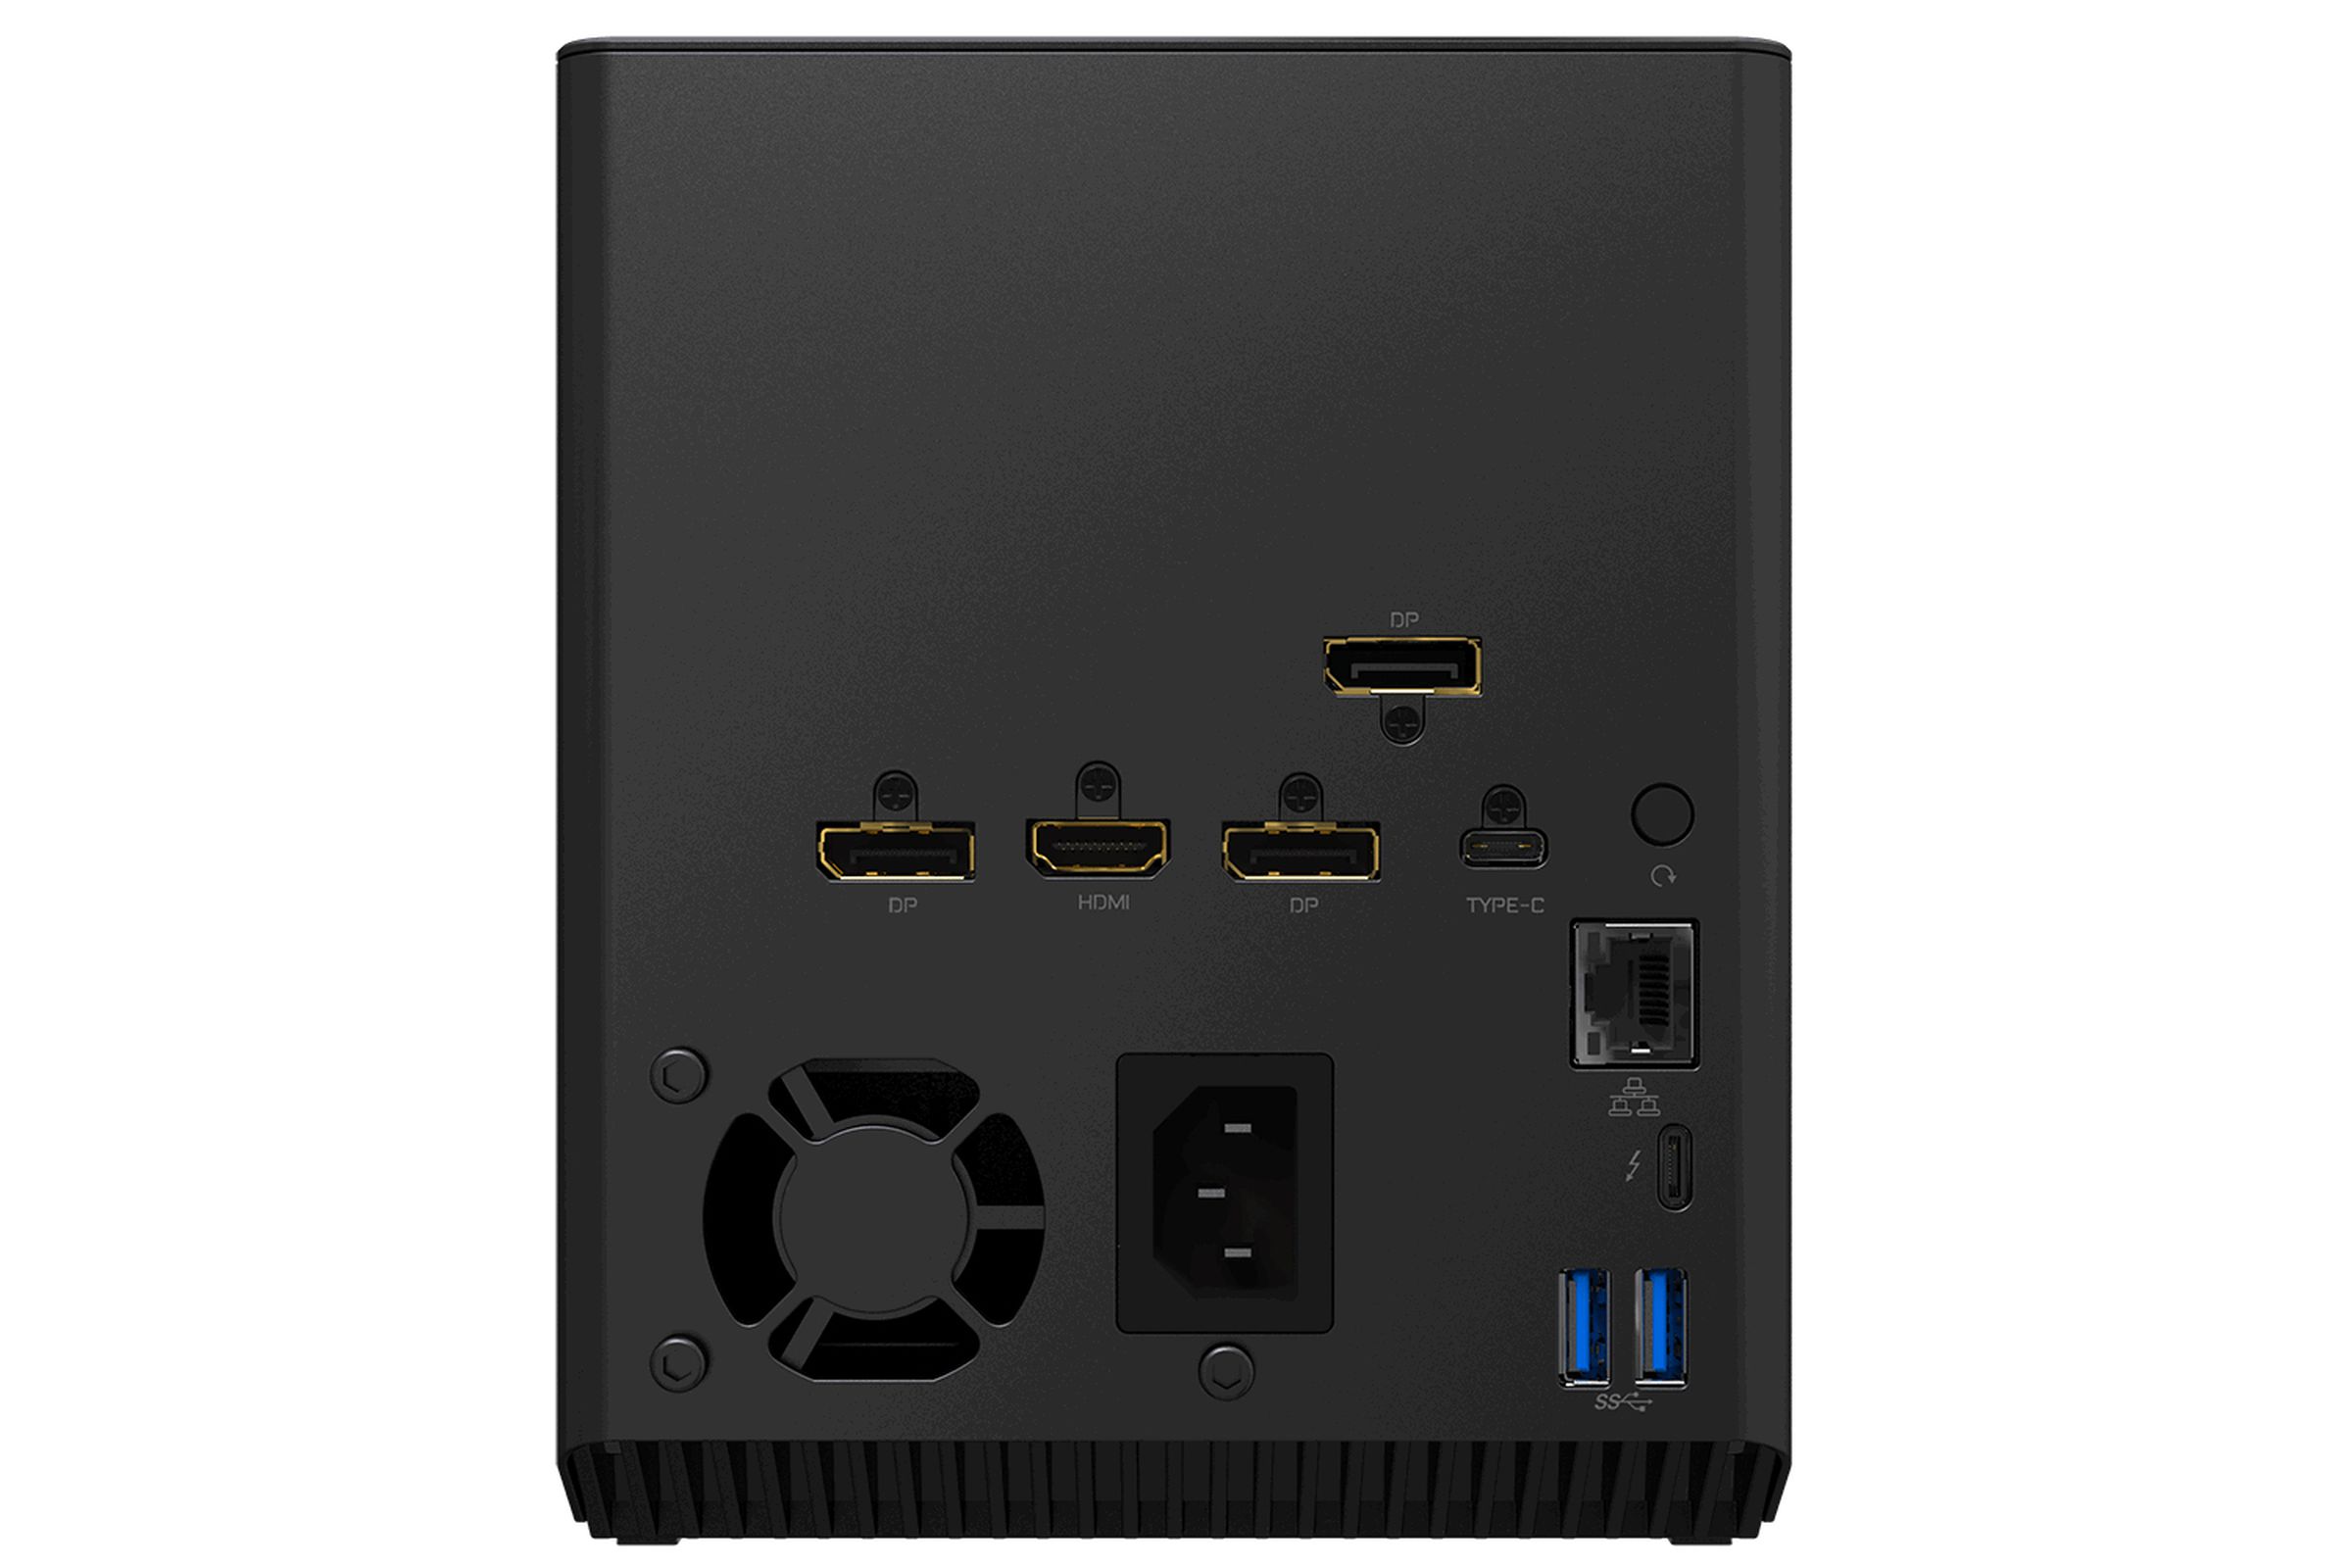 Around the back you’ll find a full suite of display outputs as well as USB-A and USB-C connectivity.